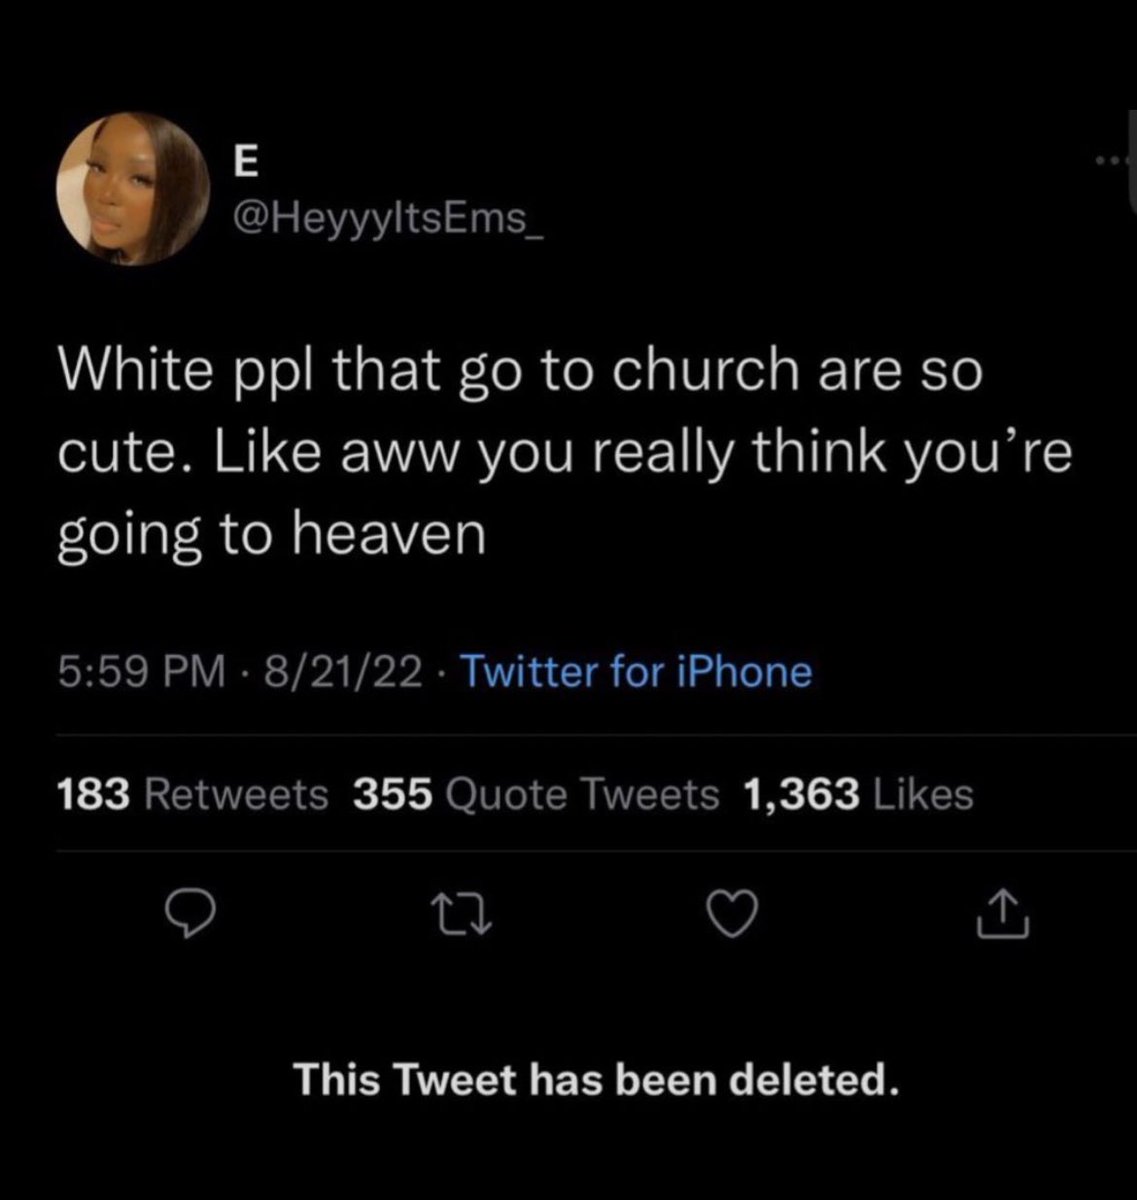 our favorite deleted tweets - atmosphere - E White ppl that go to church are so cute. aww you really think you're going to heaven 82122 Twitter for iPhone 183 355 Quote Tweets 1,363 27 This Tweet has been deleted.